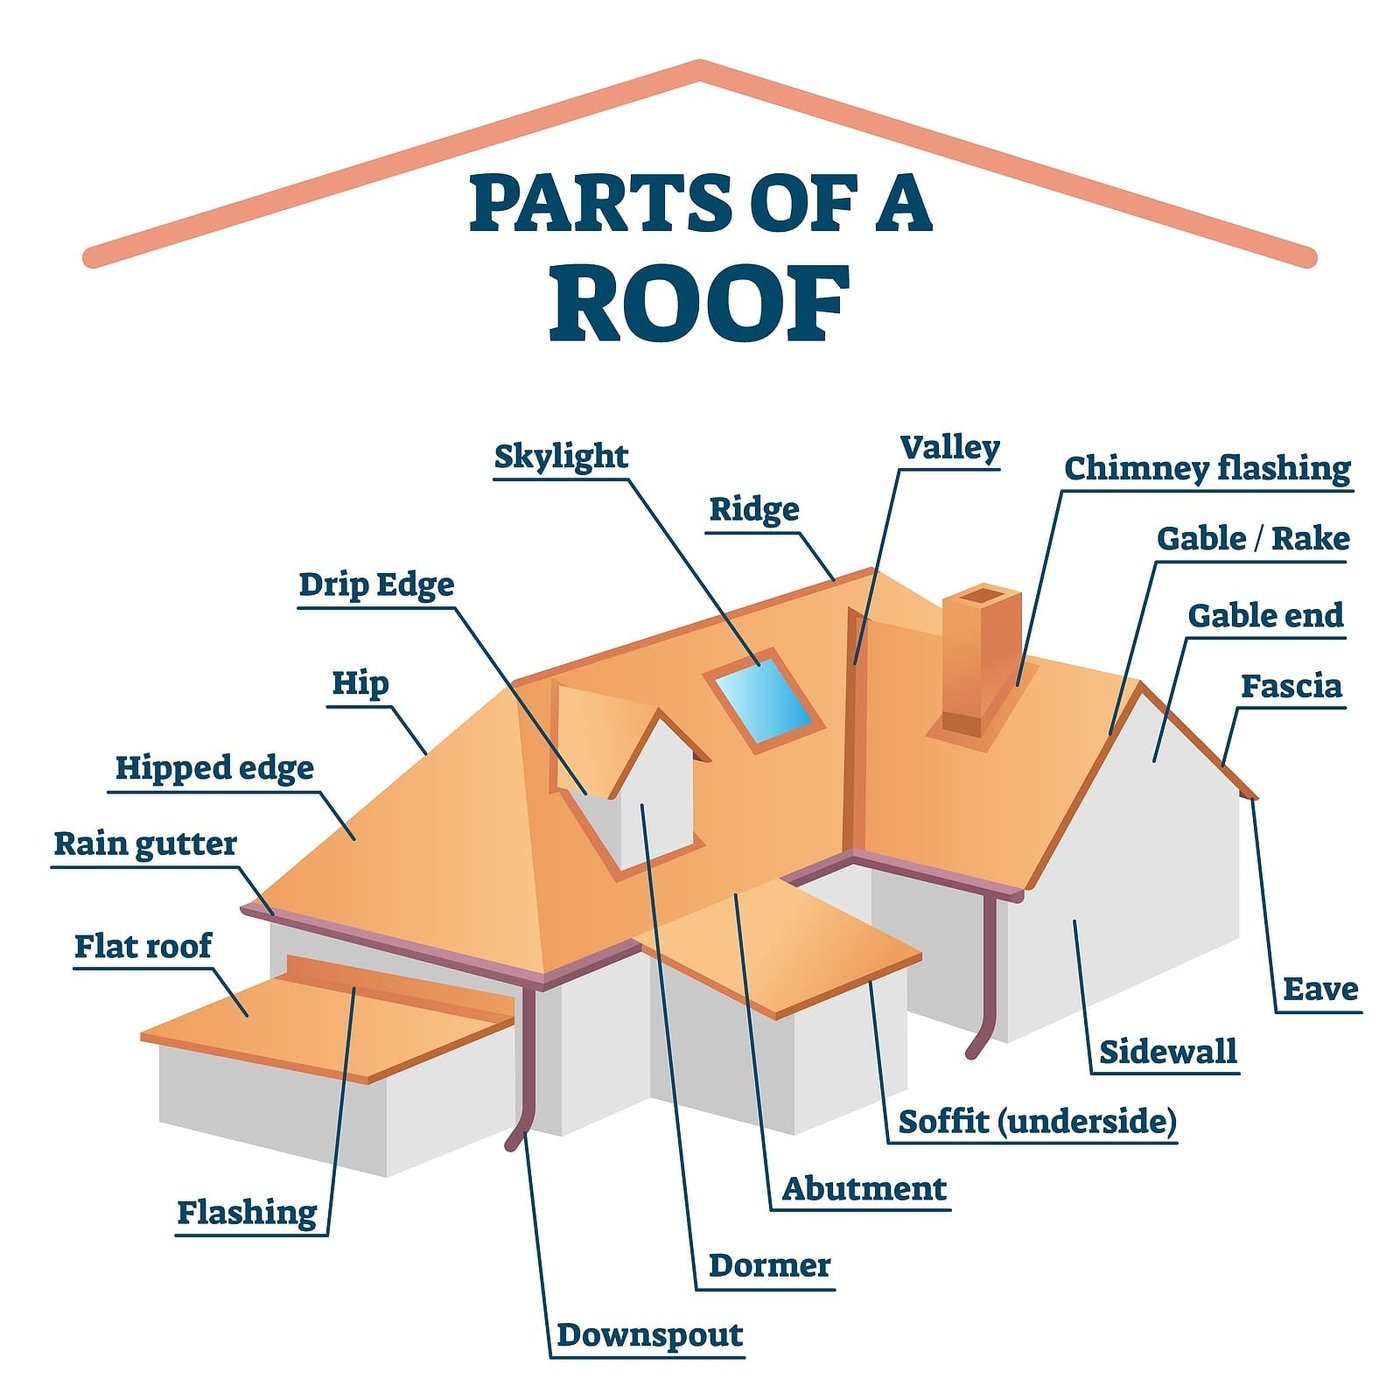 Parts of a Roof.jpg